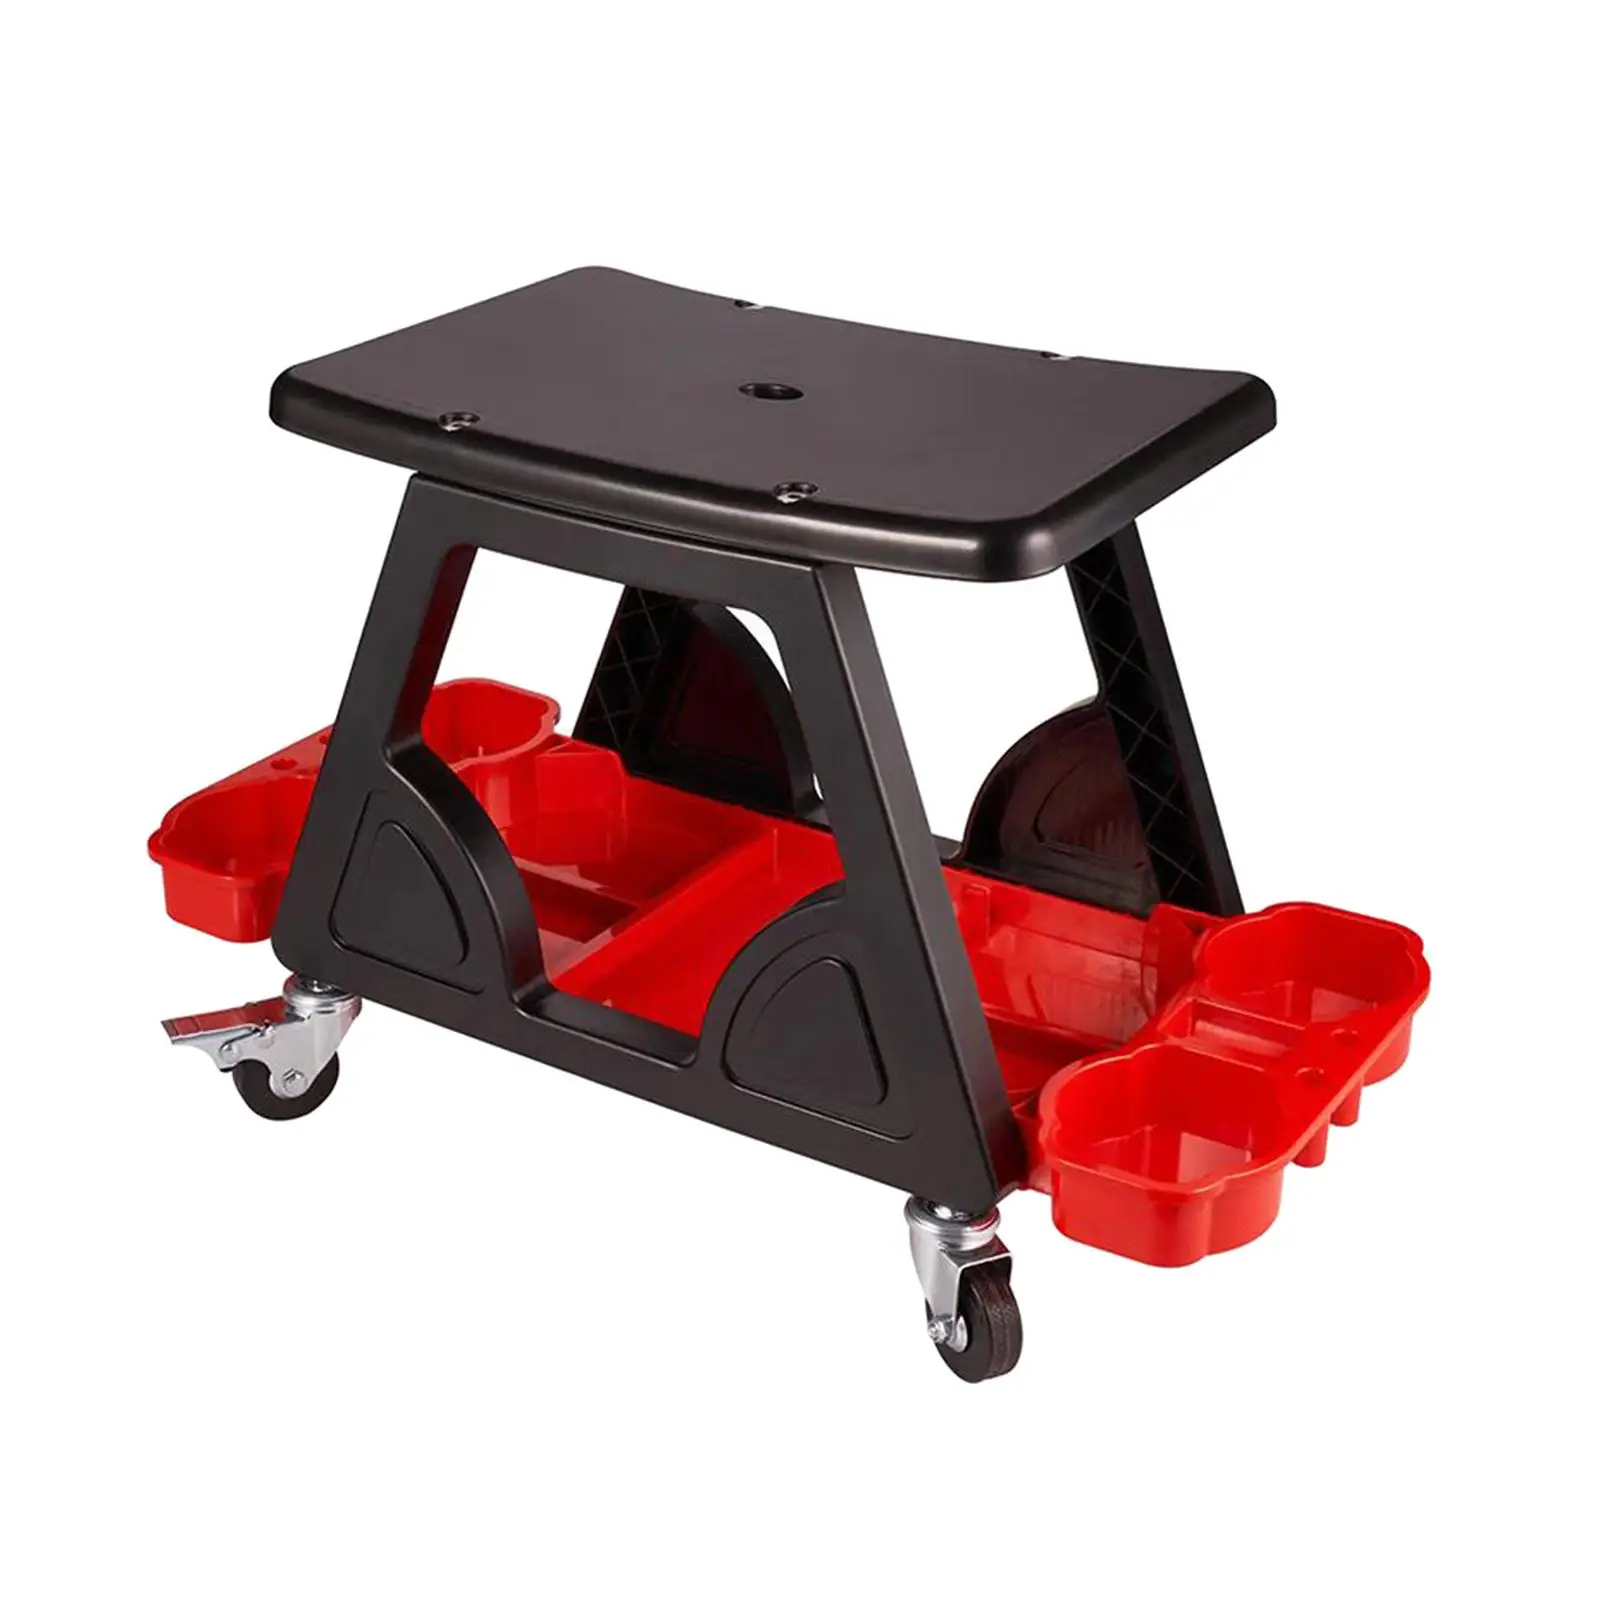 Garage Shop Stool Creeper Car Detailing Stool Auto Work Repair Durable with Tool Storage Tray Roller Seat Mechanic Creeper Seat